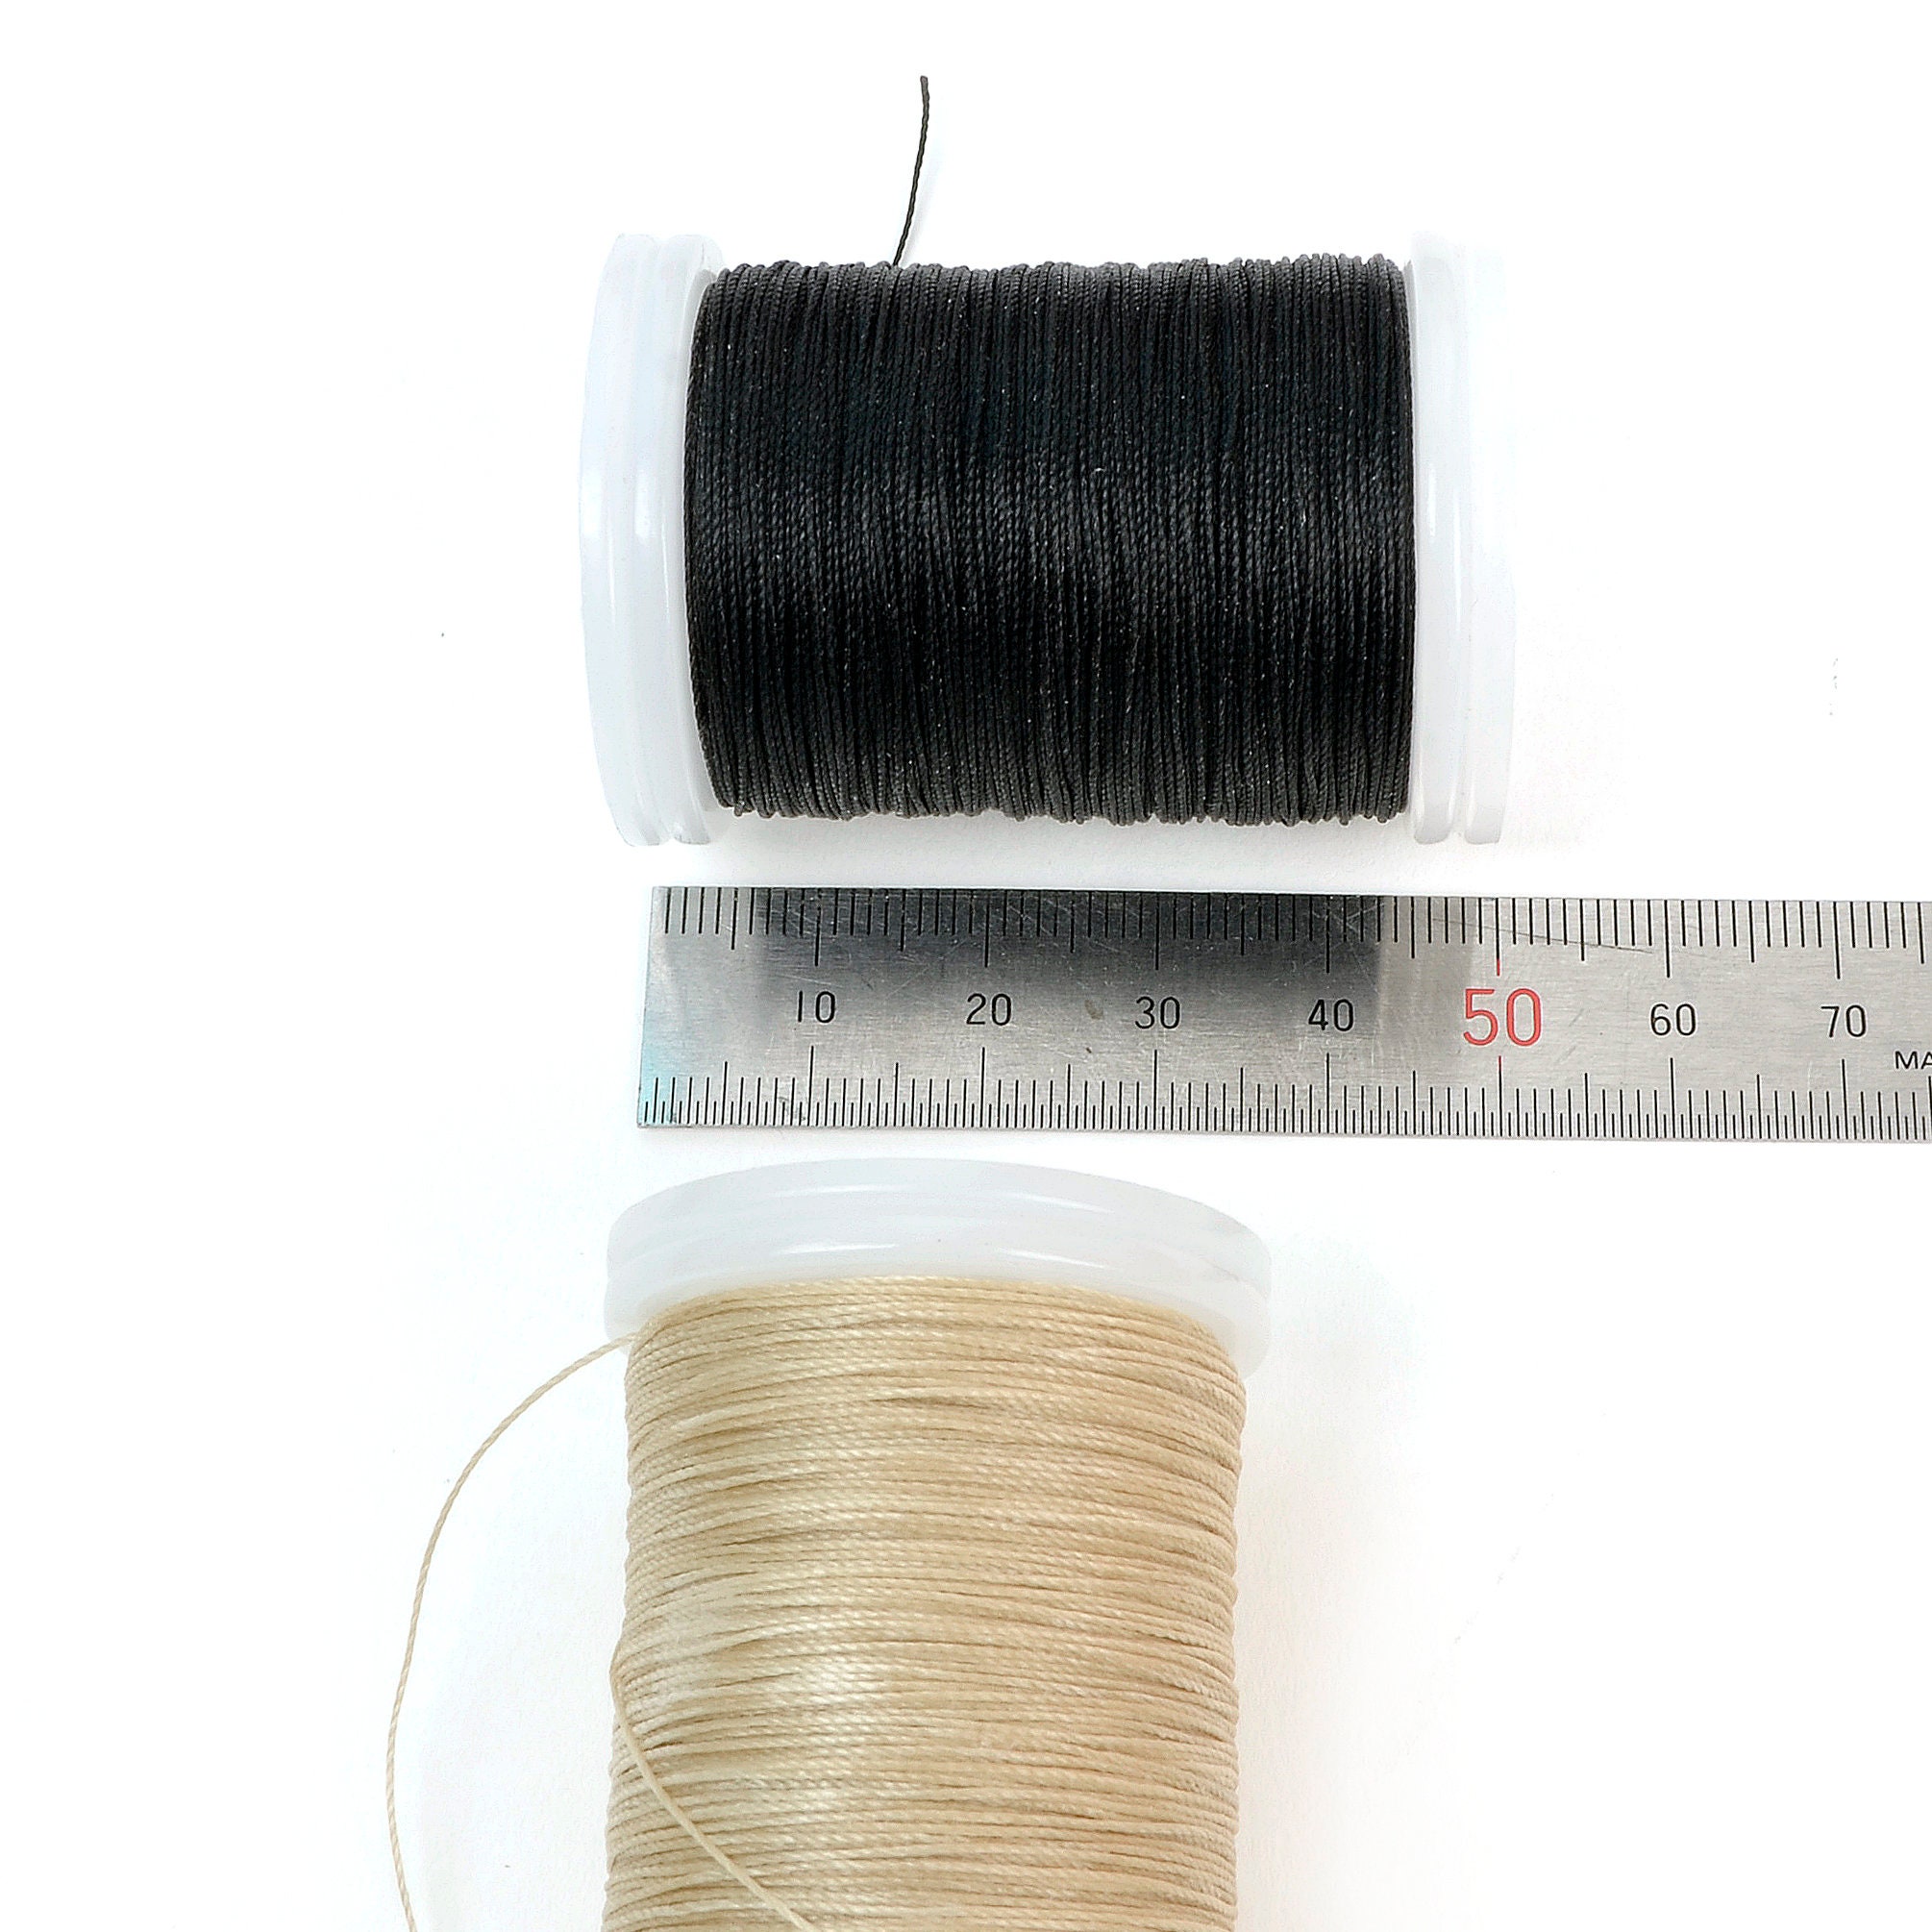 264 Yards 150D Leather Sewing Waxed Thread Cord for Leather Craft DIY 1mm  Diameter 8 Colors